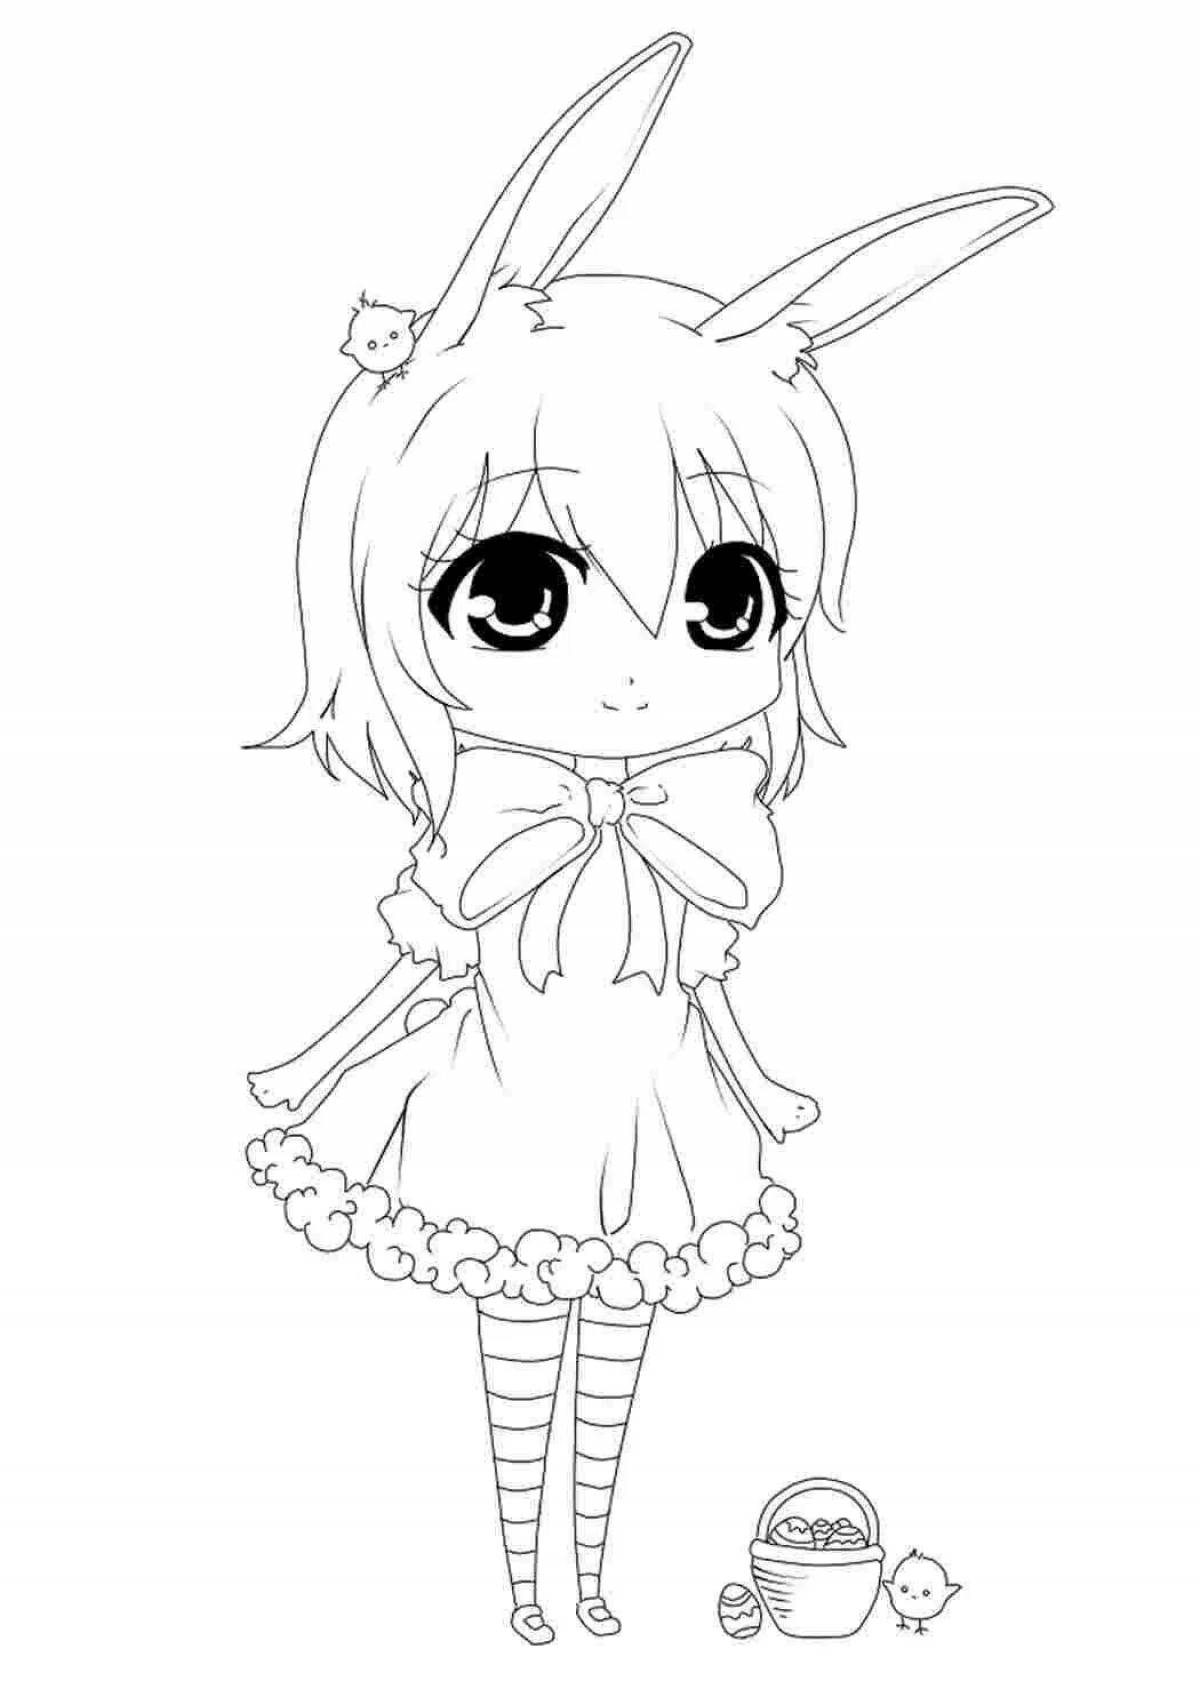 Playful anime rabbit coloring page